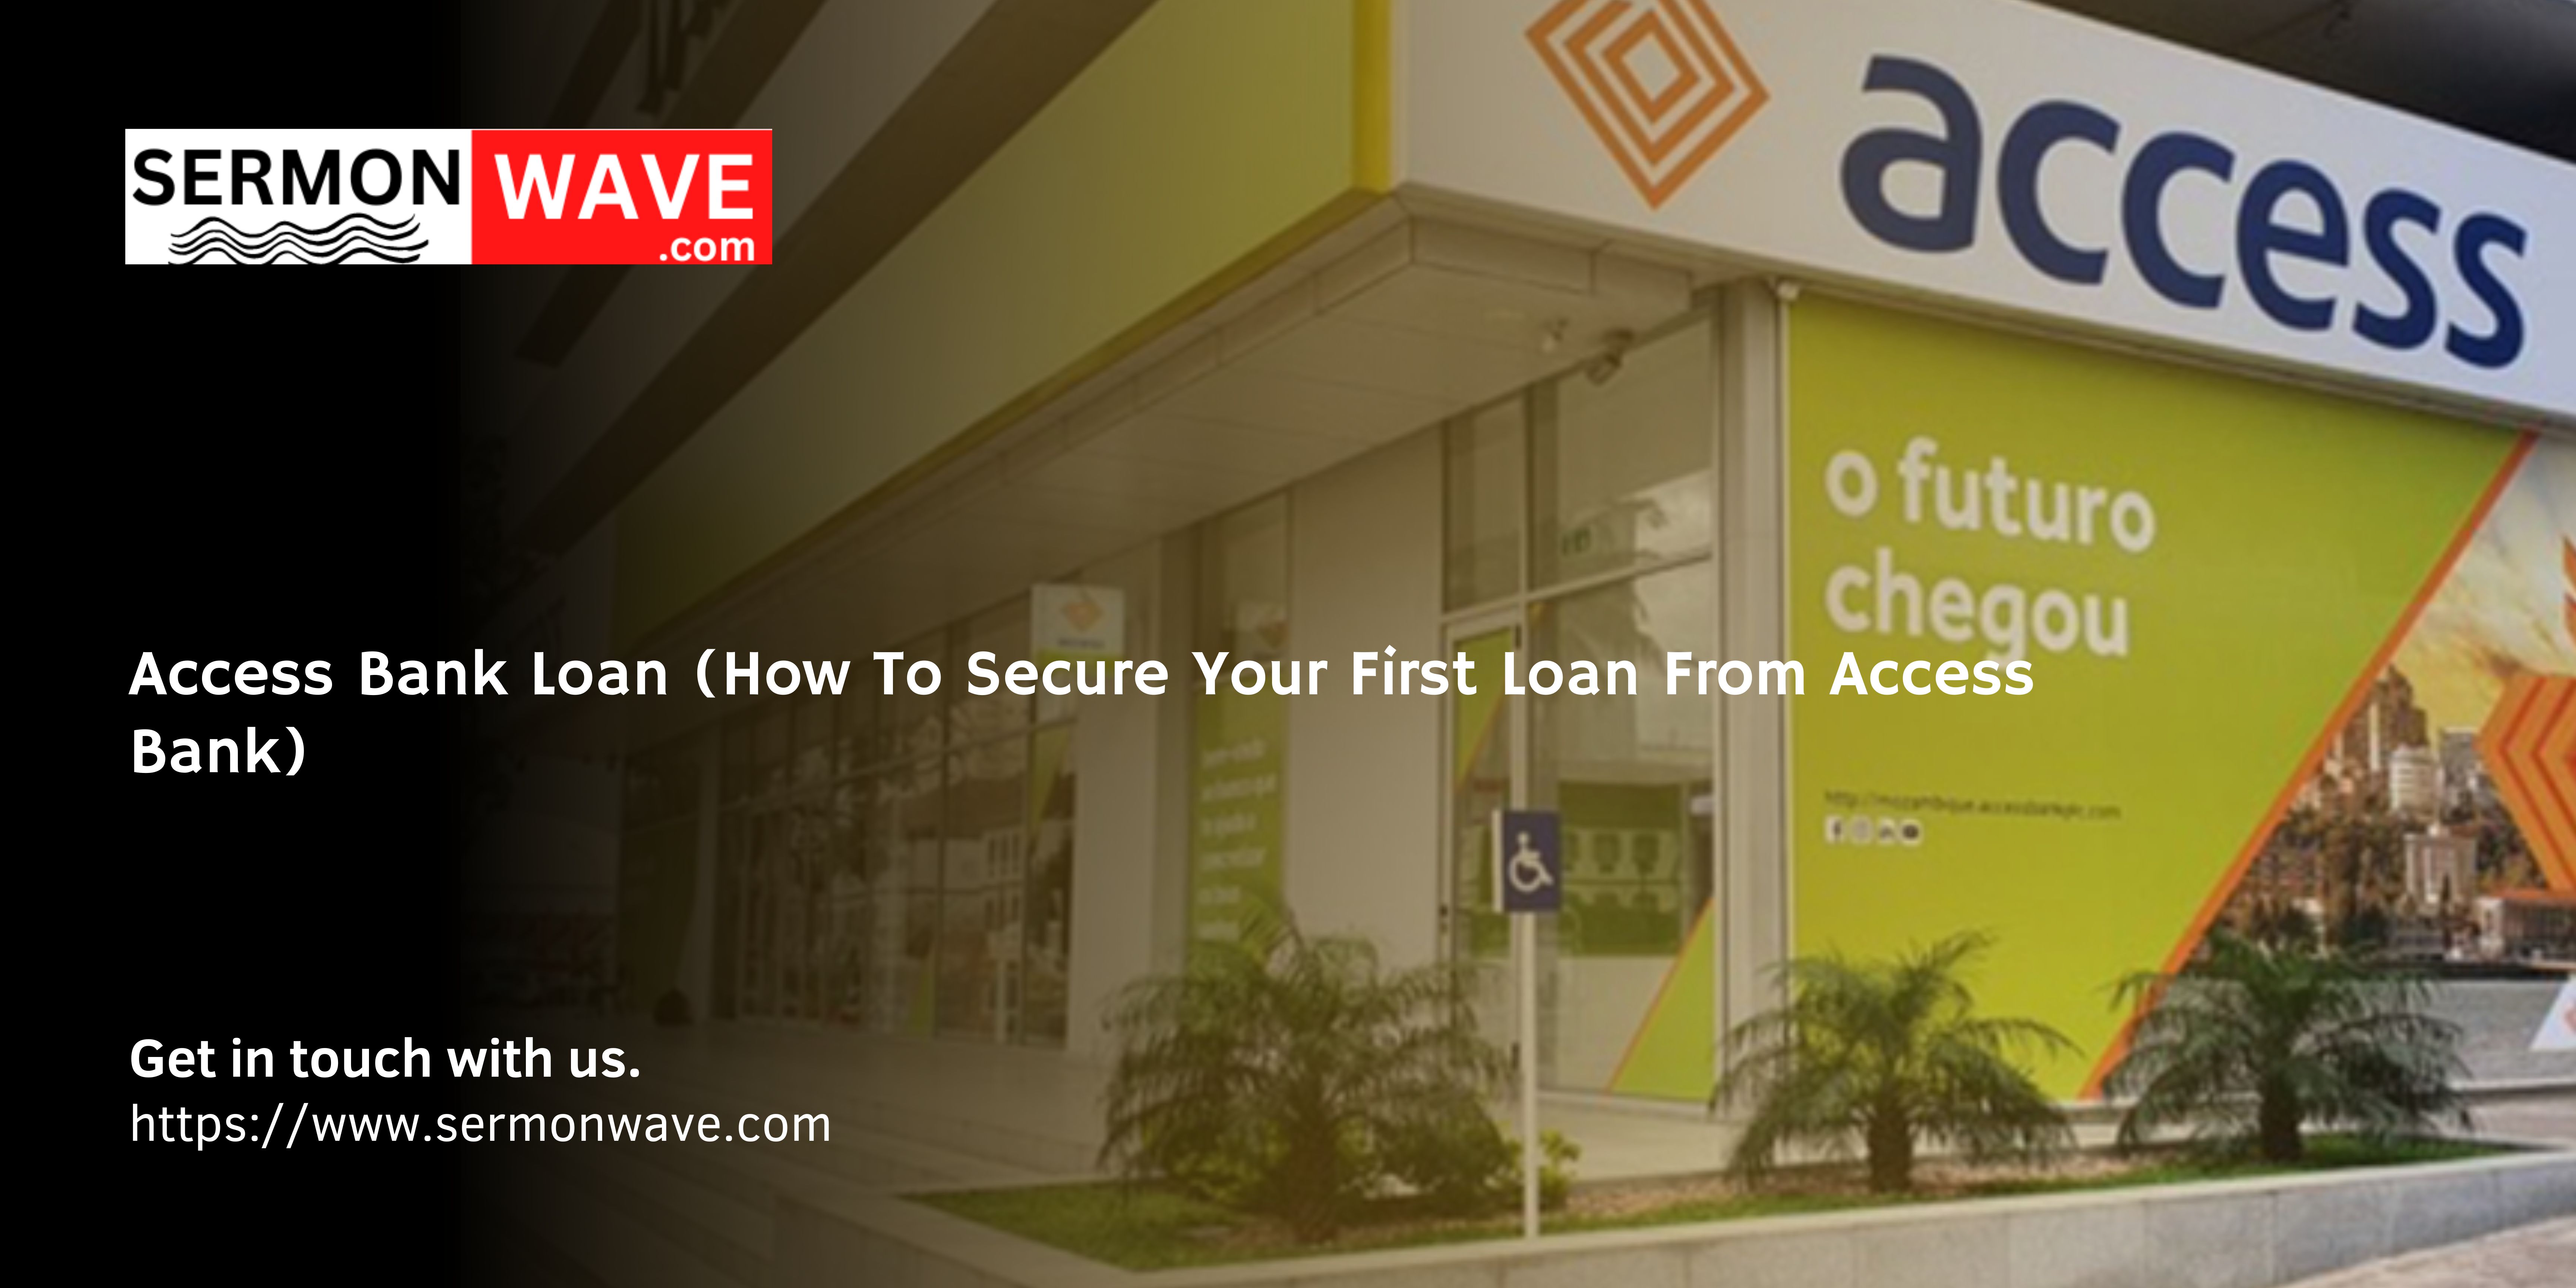 Access Bank Loan (How To Secure Your First Loan From Access Bank)